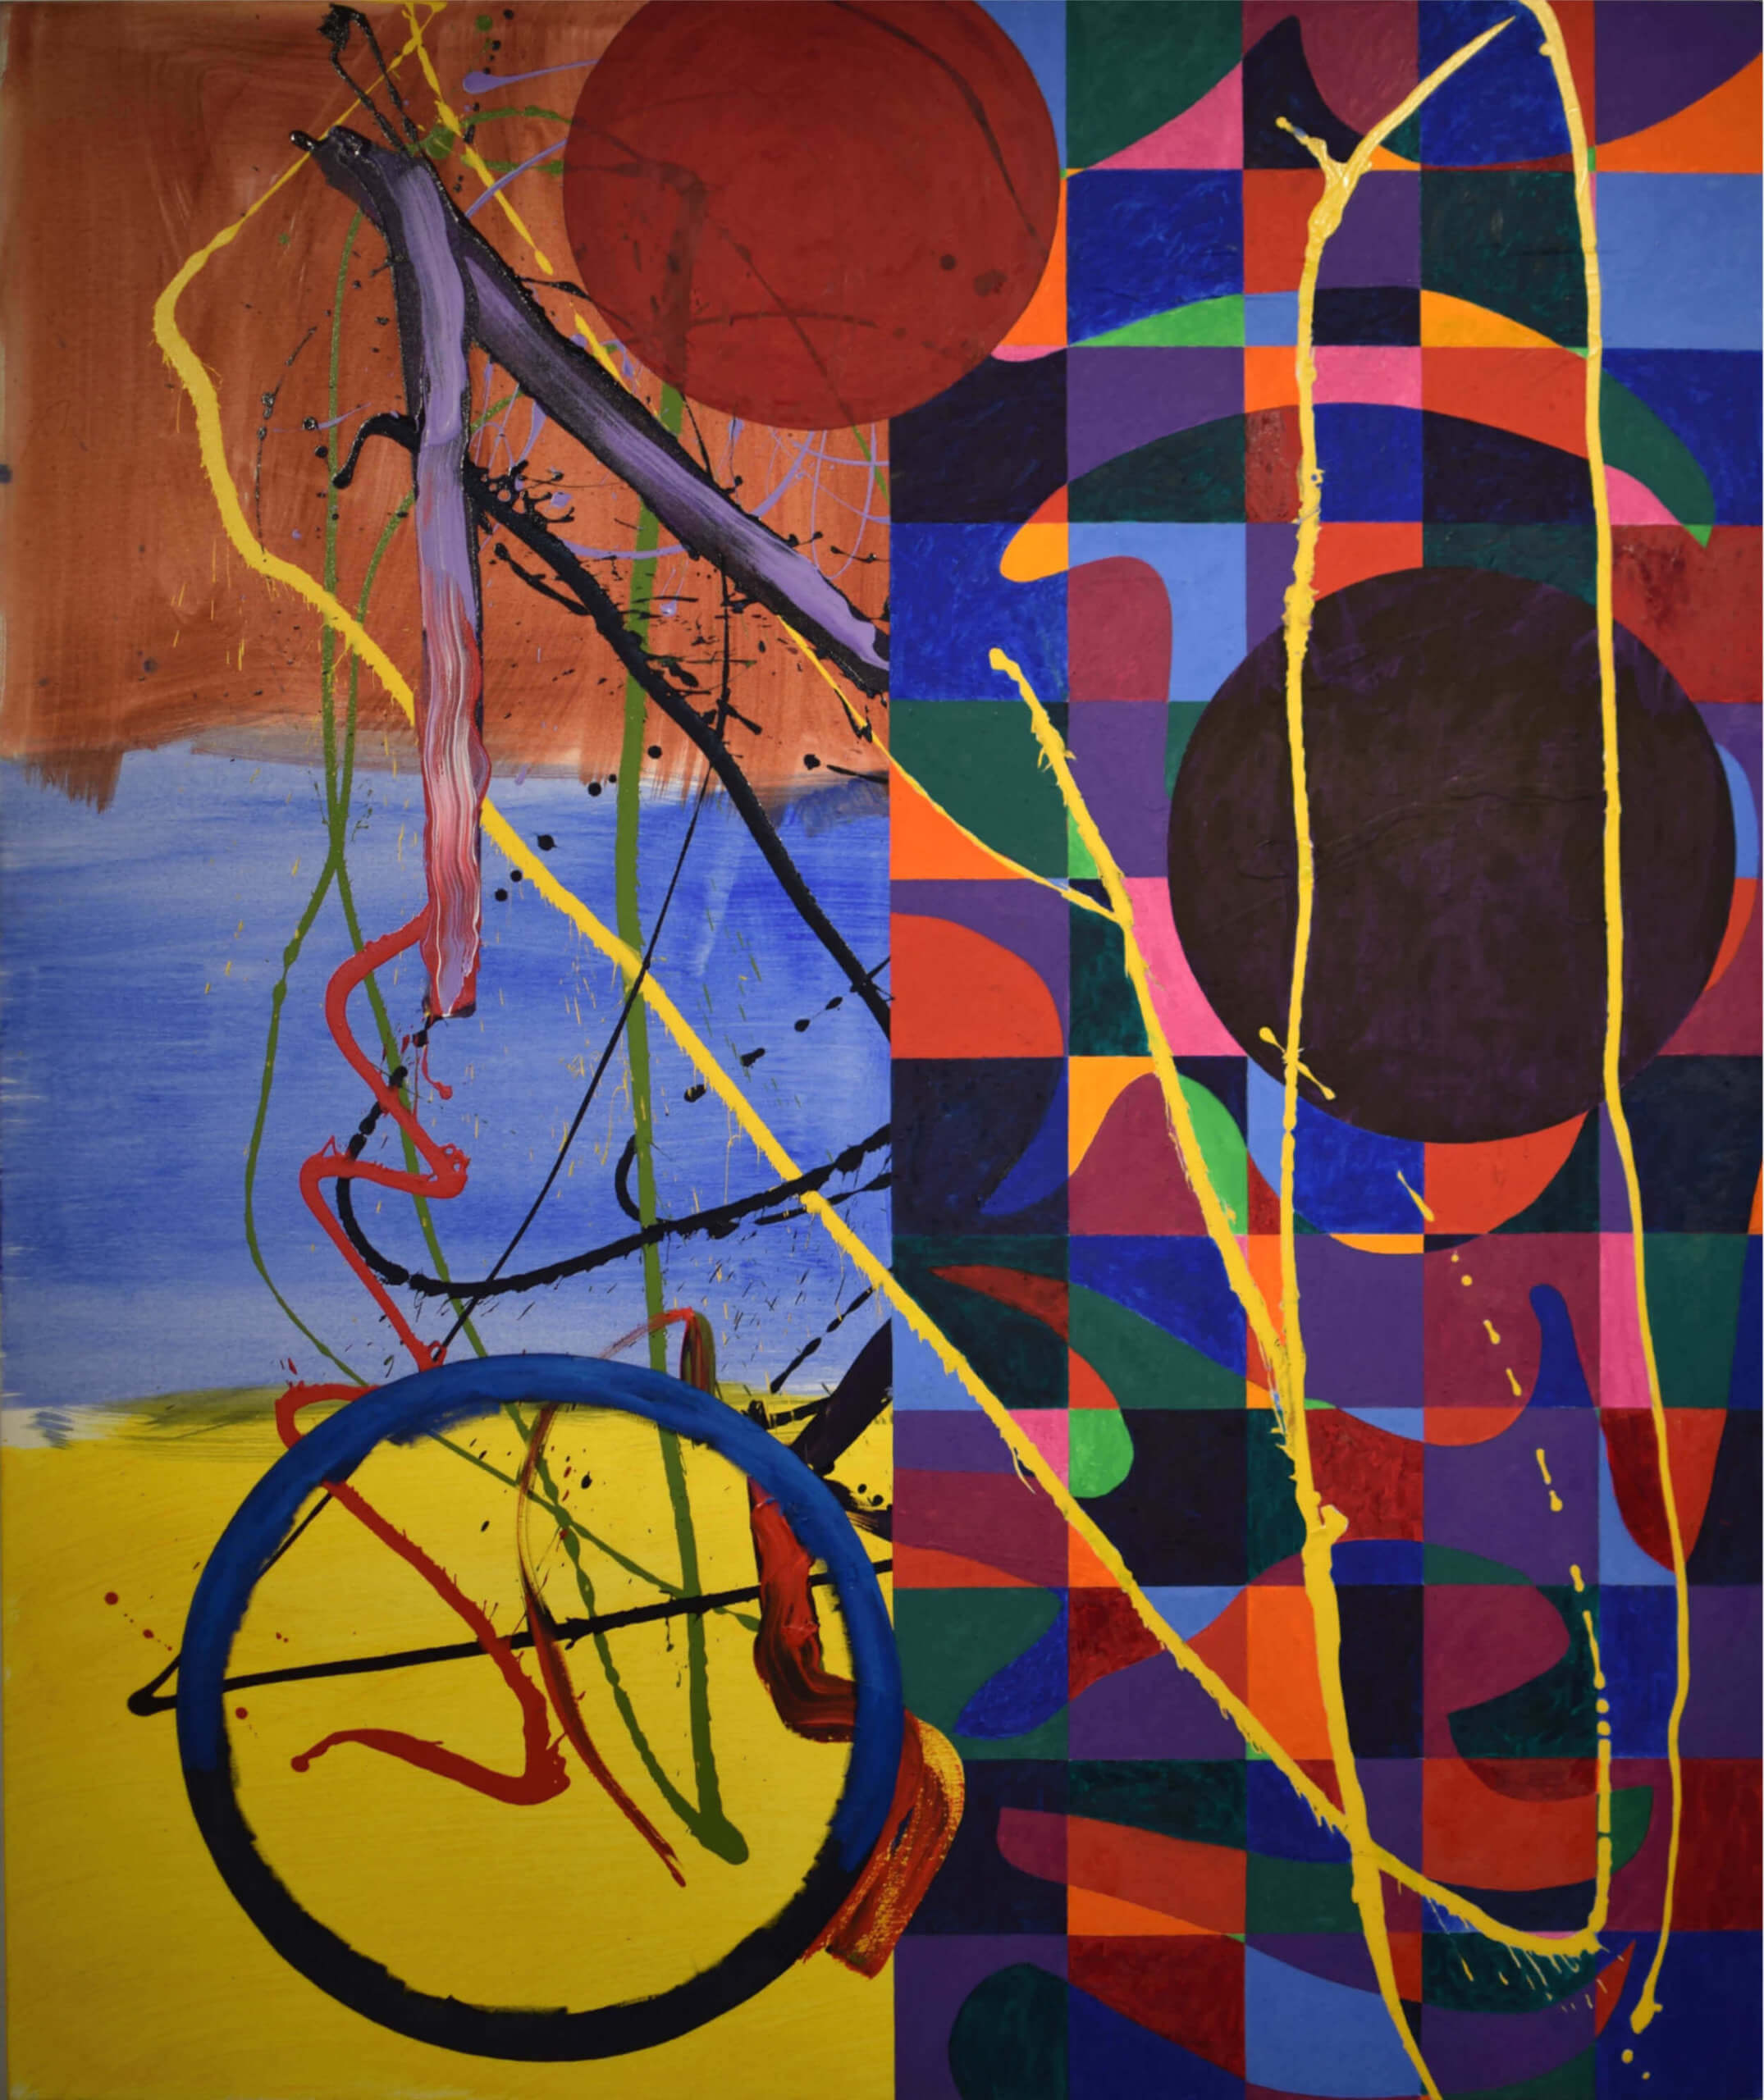 Dana Gordon, Coming To, 2015-16, 72 x 60 inches, oil and acrylic on canvas (courtesy of the artist)